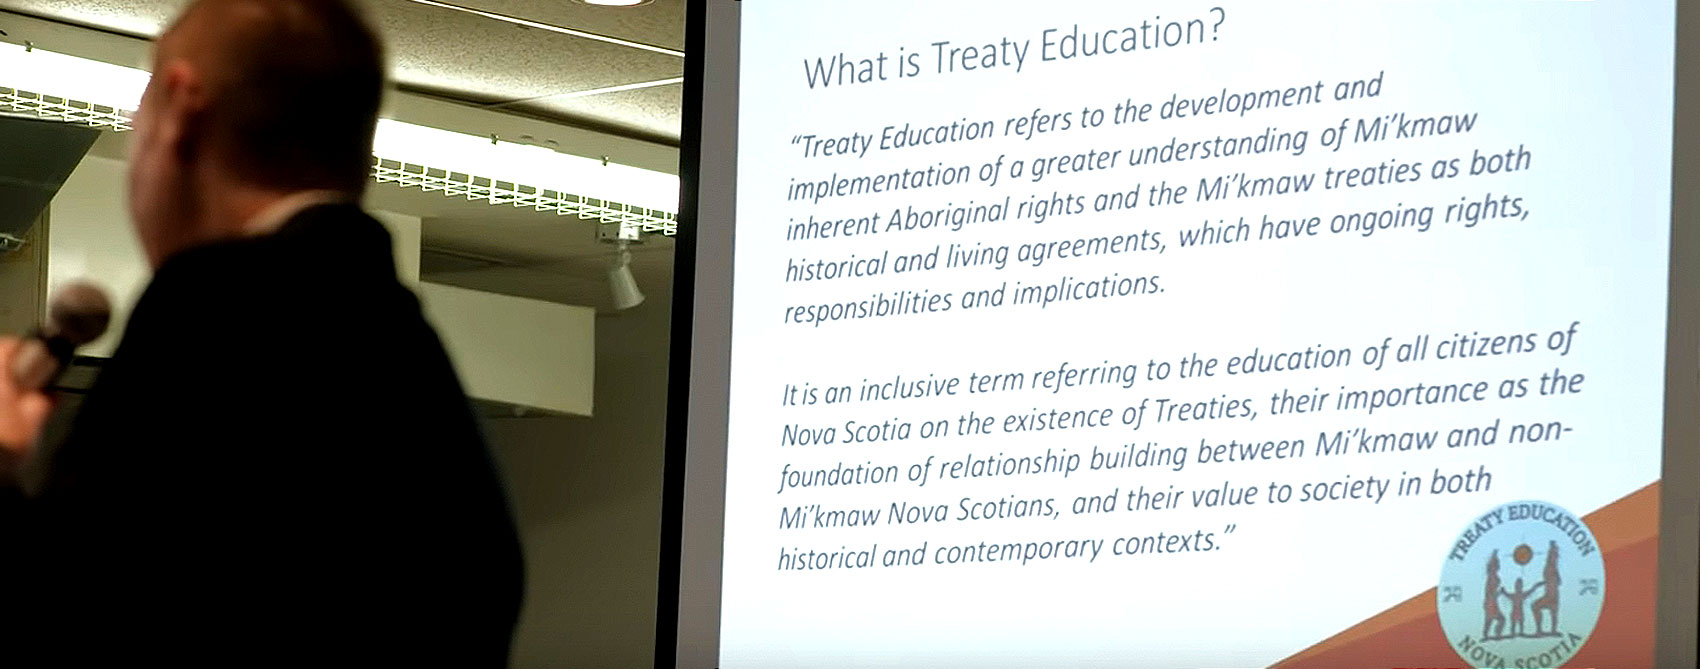 What is Treaty Education